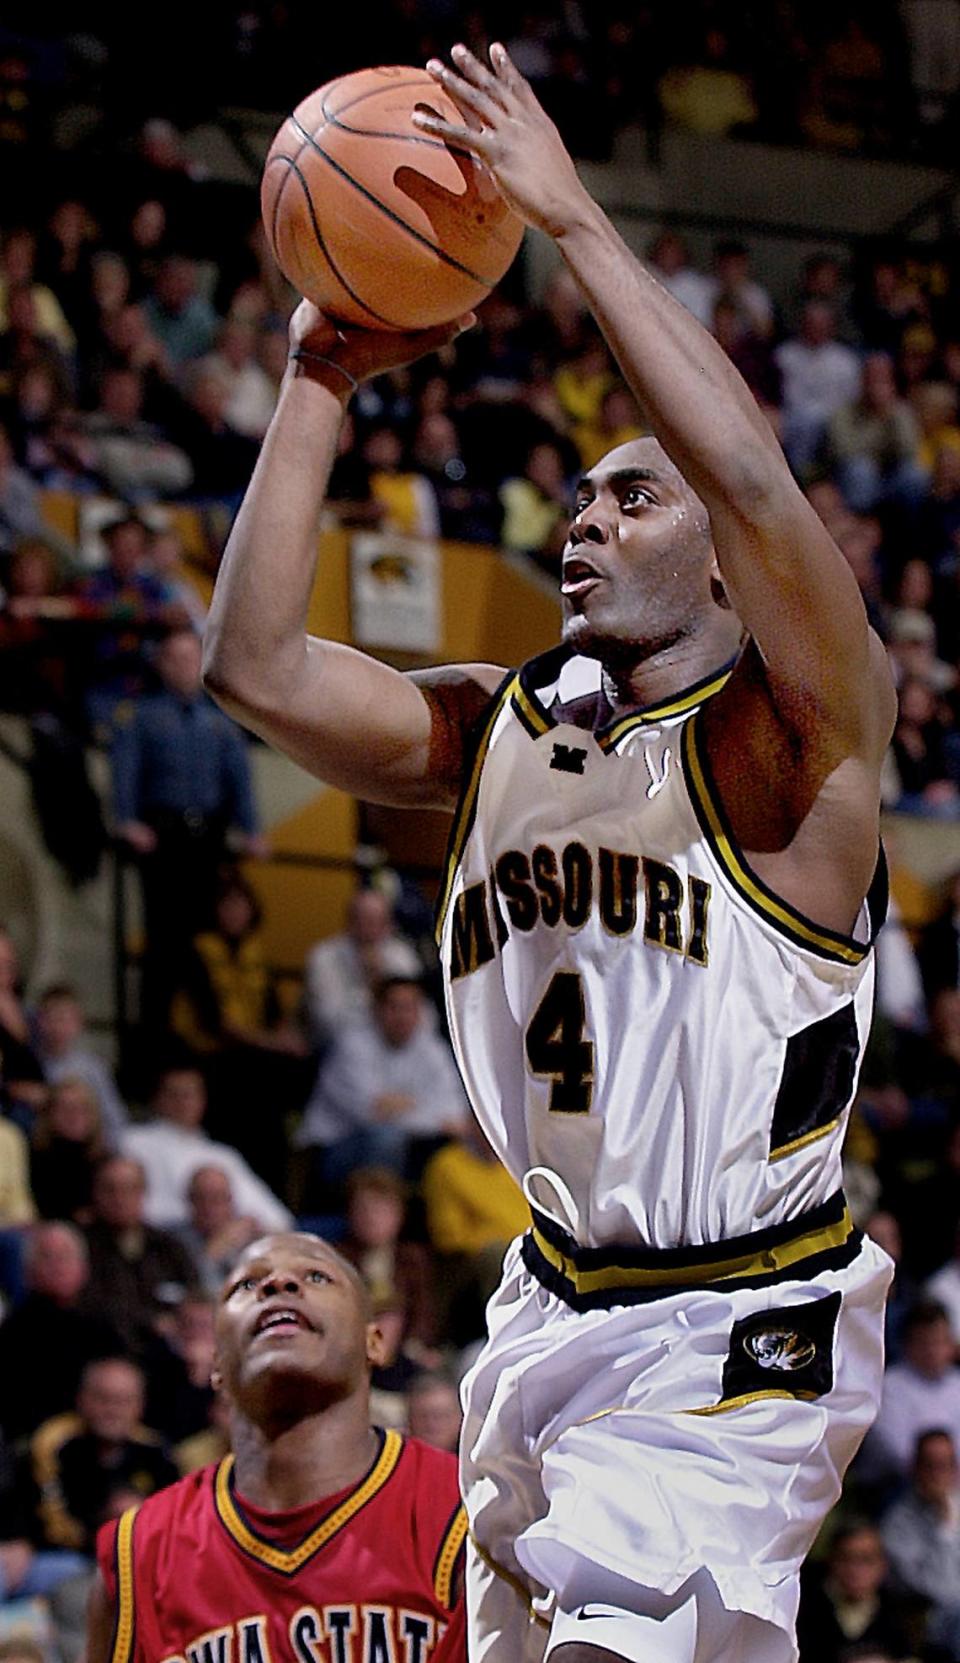 Iowa State’s Kantrail Horton could only watch as Missouri’s Clarence Gilbert put up one of his school-record 36 shots during a 2001 home game. Gilbert finished with 43 points as the Tigers won 112-109 in four overtimes.